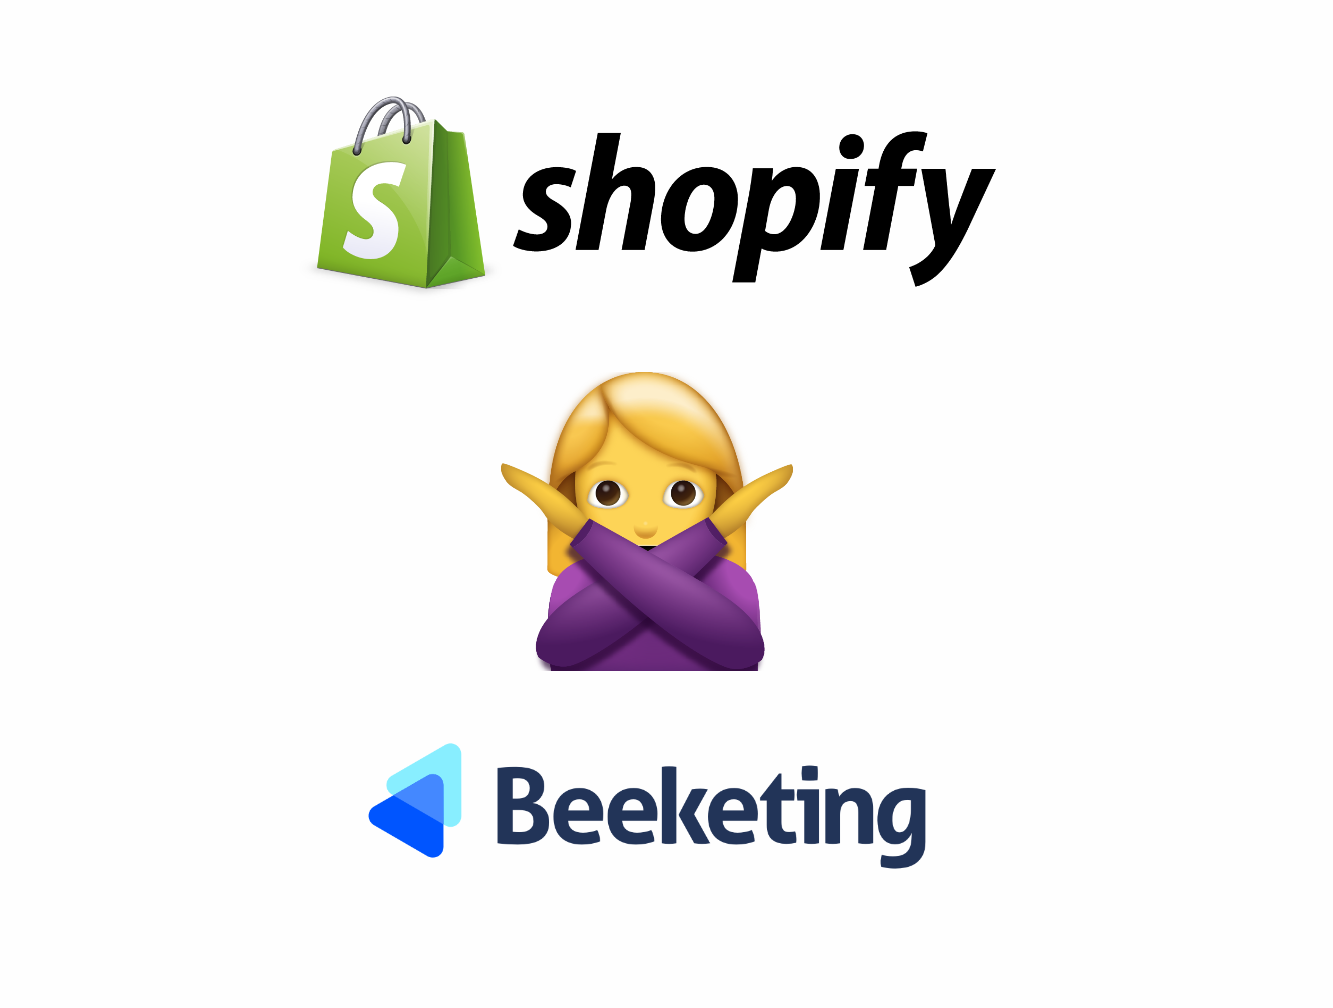 Beeketing Cancels All Shopify Subscriptions - The Official Announcement and Alternatives